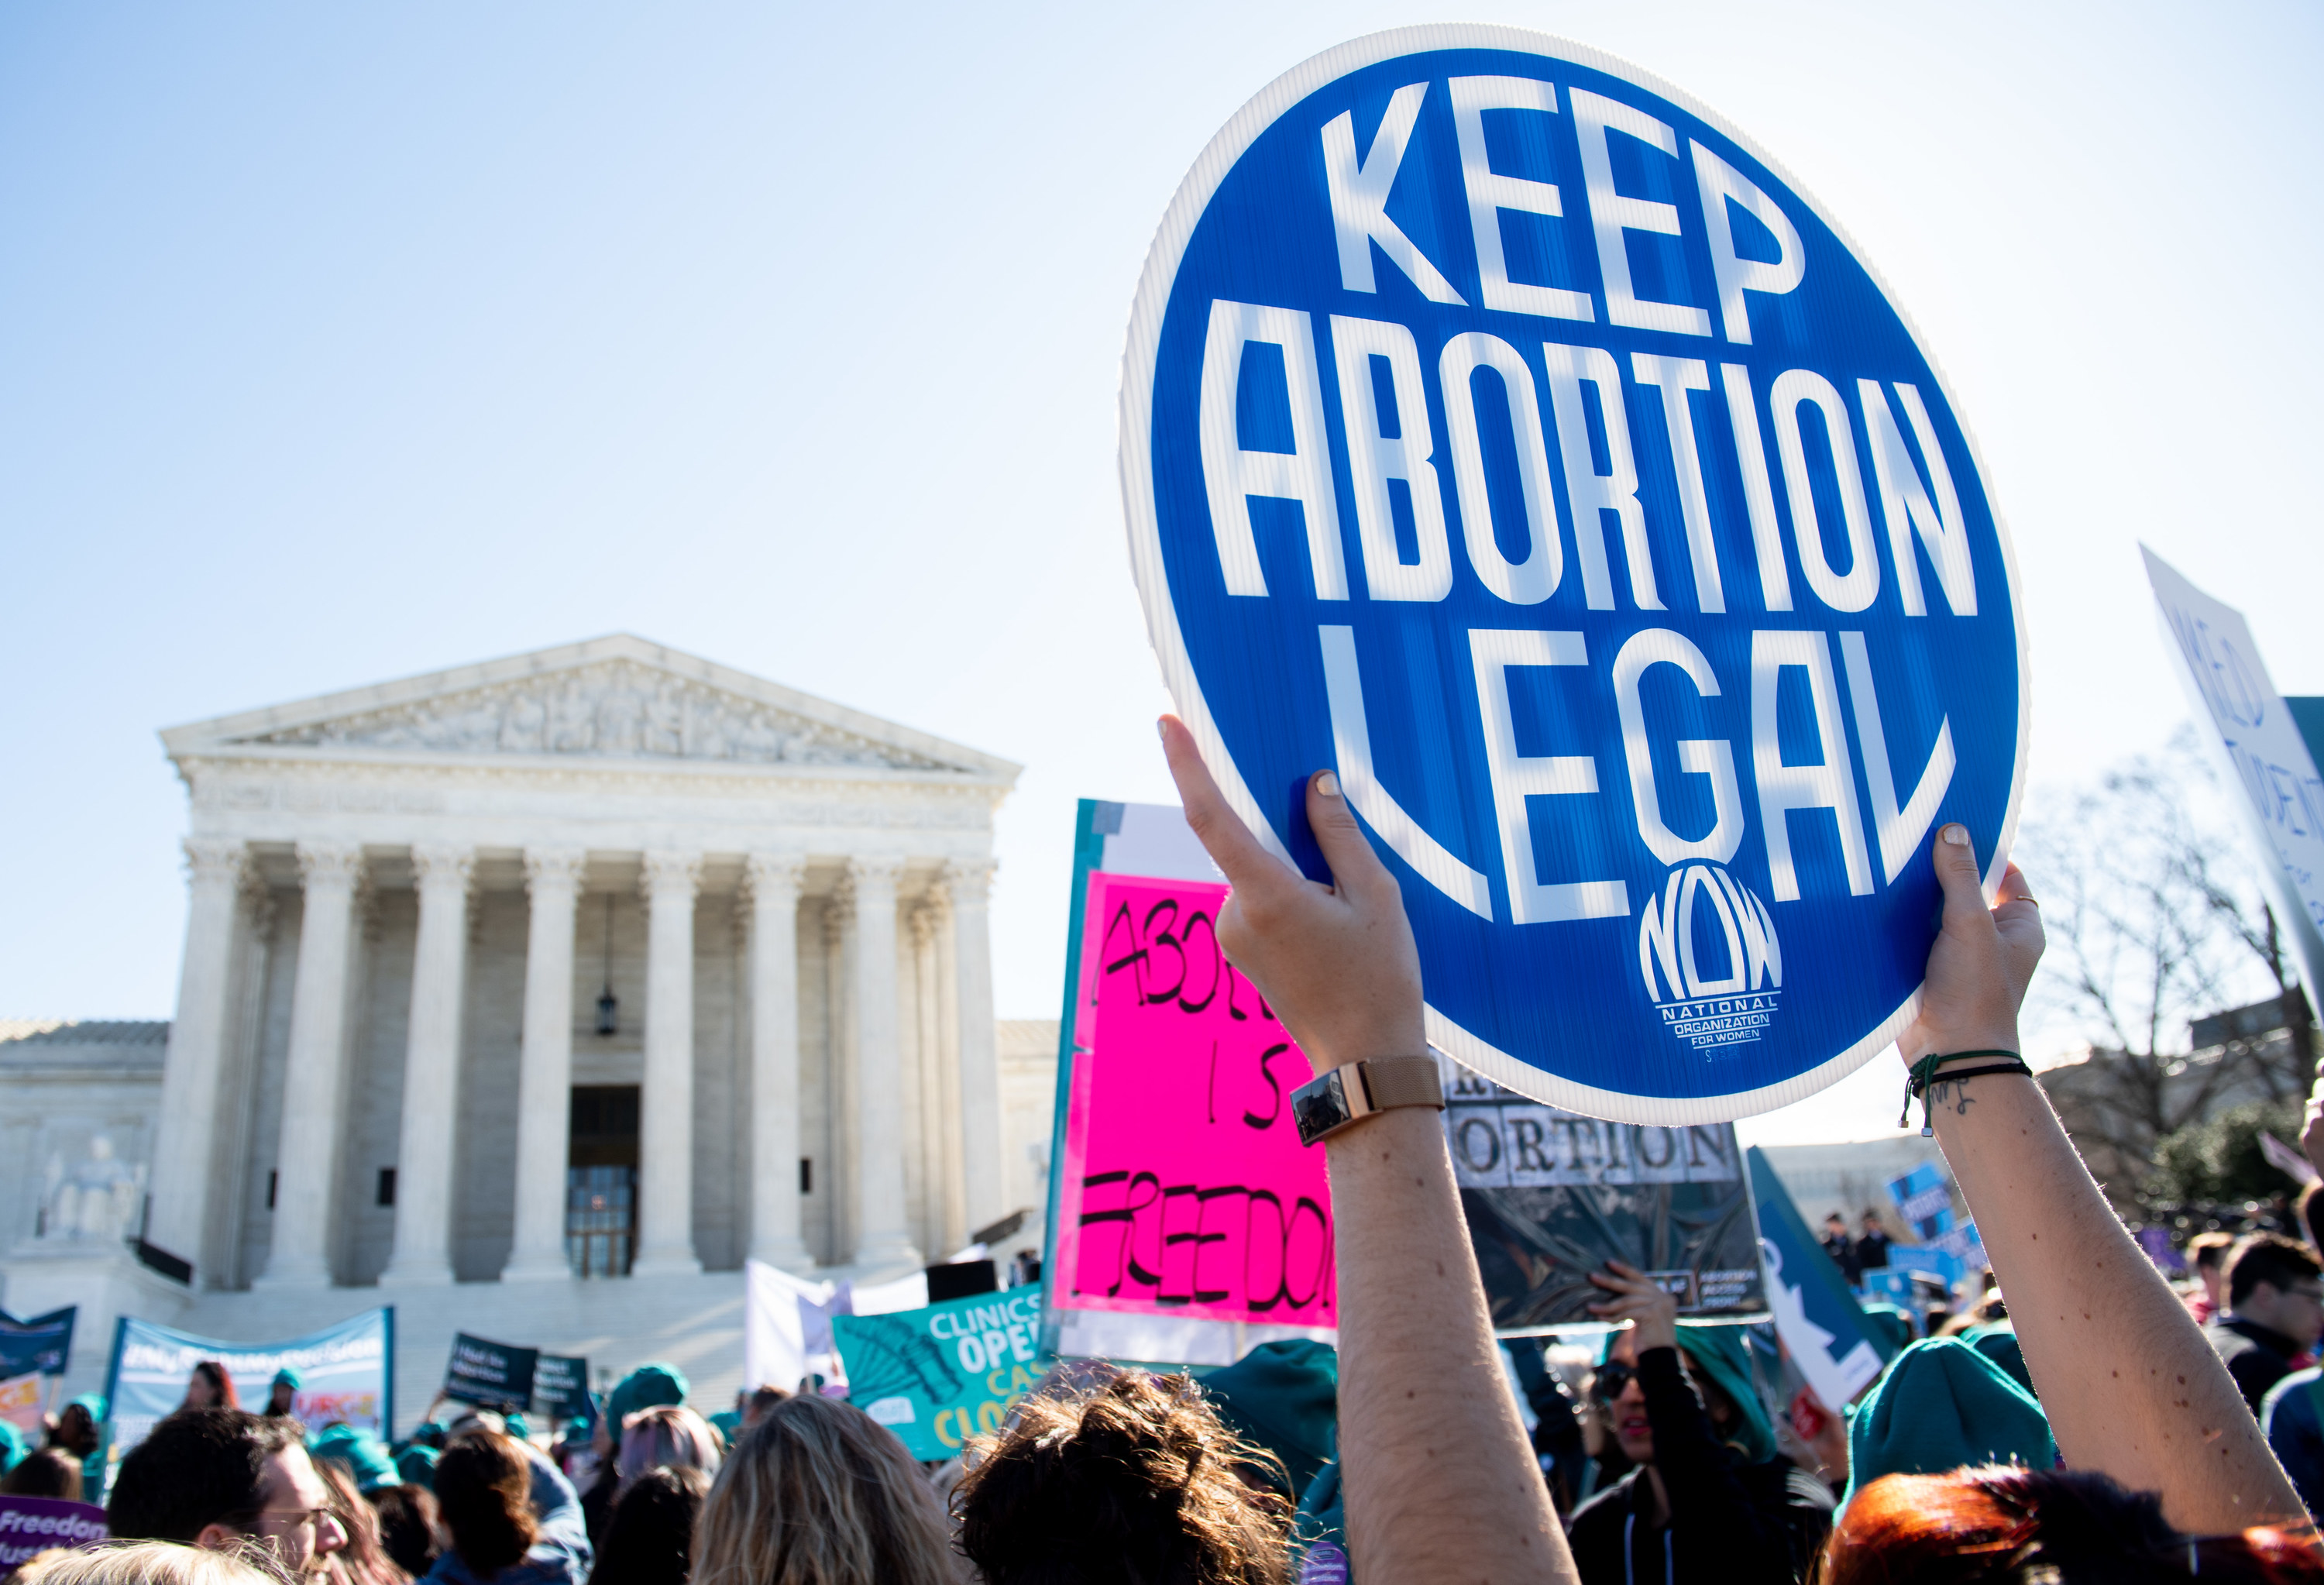 An image of a &quot;keep abortion legal&quot; sign at a protest